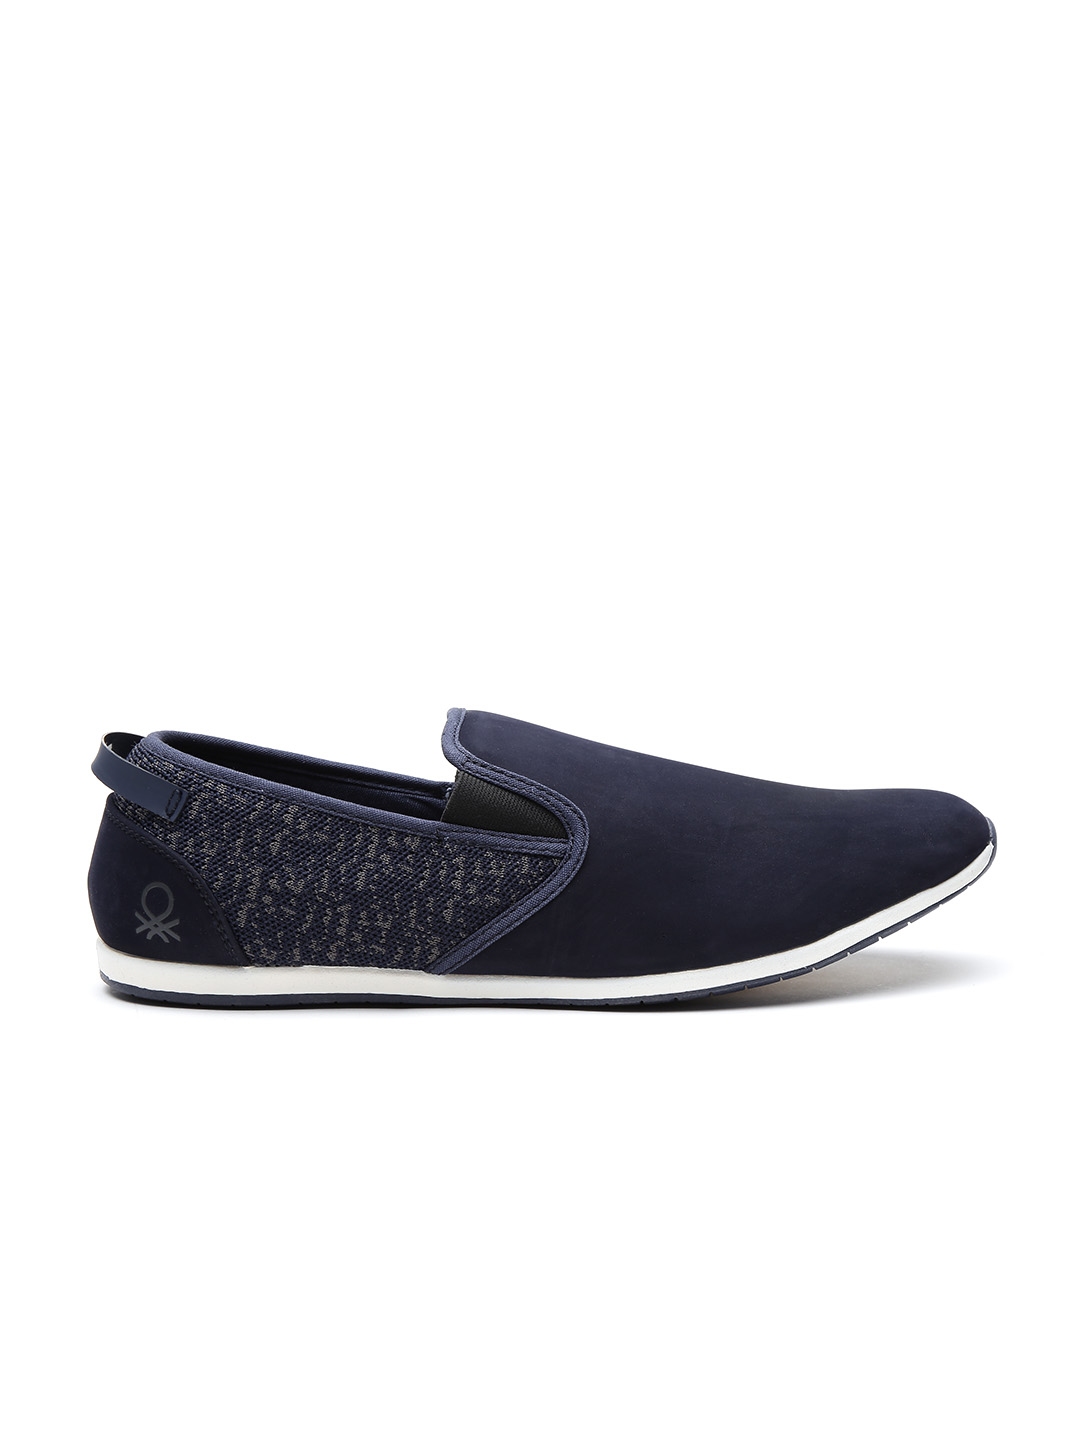 Buy United Colors Of Benetton Men Navy Slip On Sneakers - Casual Shoes ...